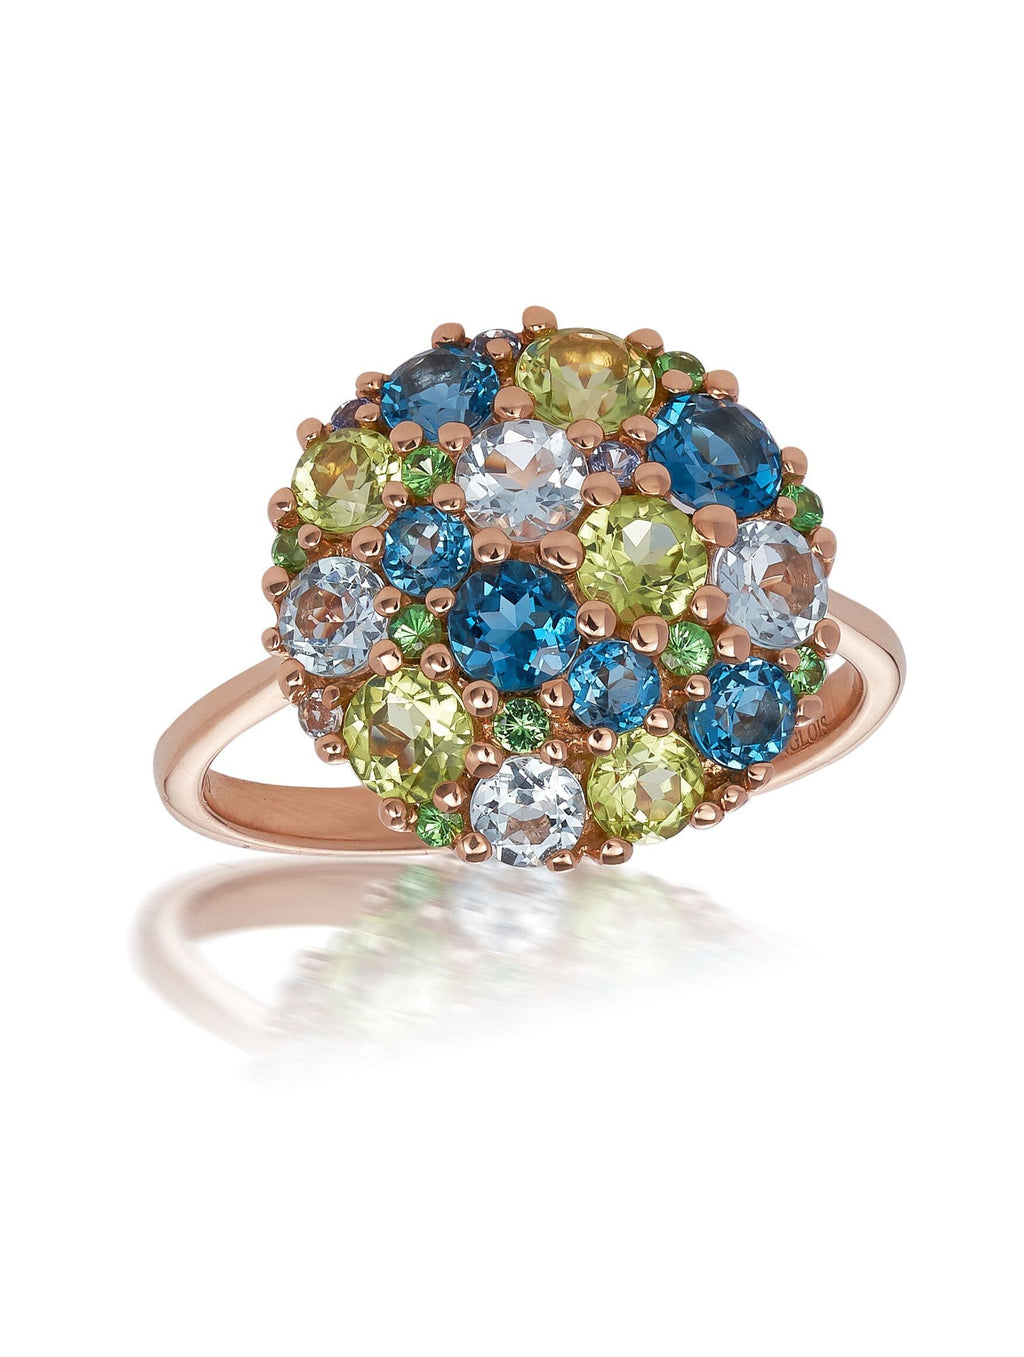 Isabelle Langlois Pointillist Mixed Gemstone Ring